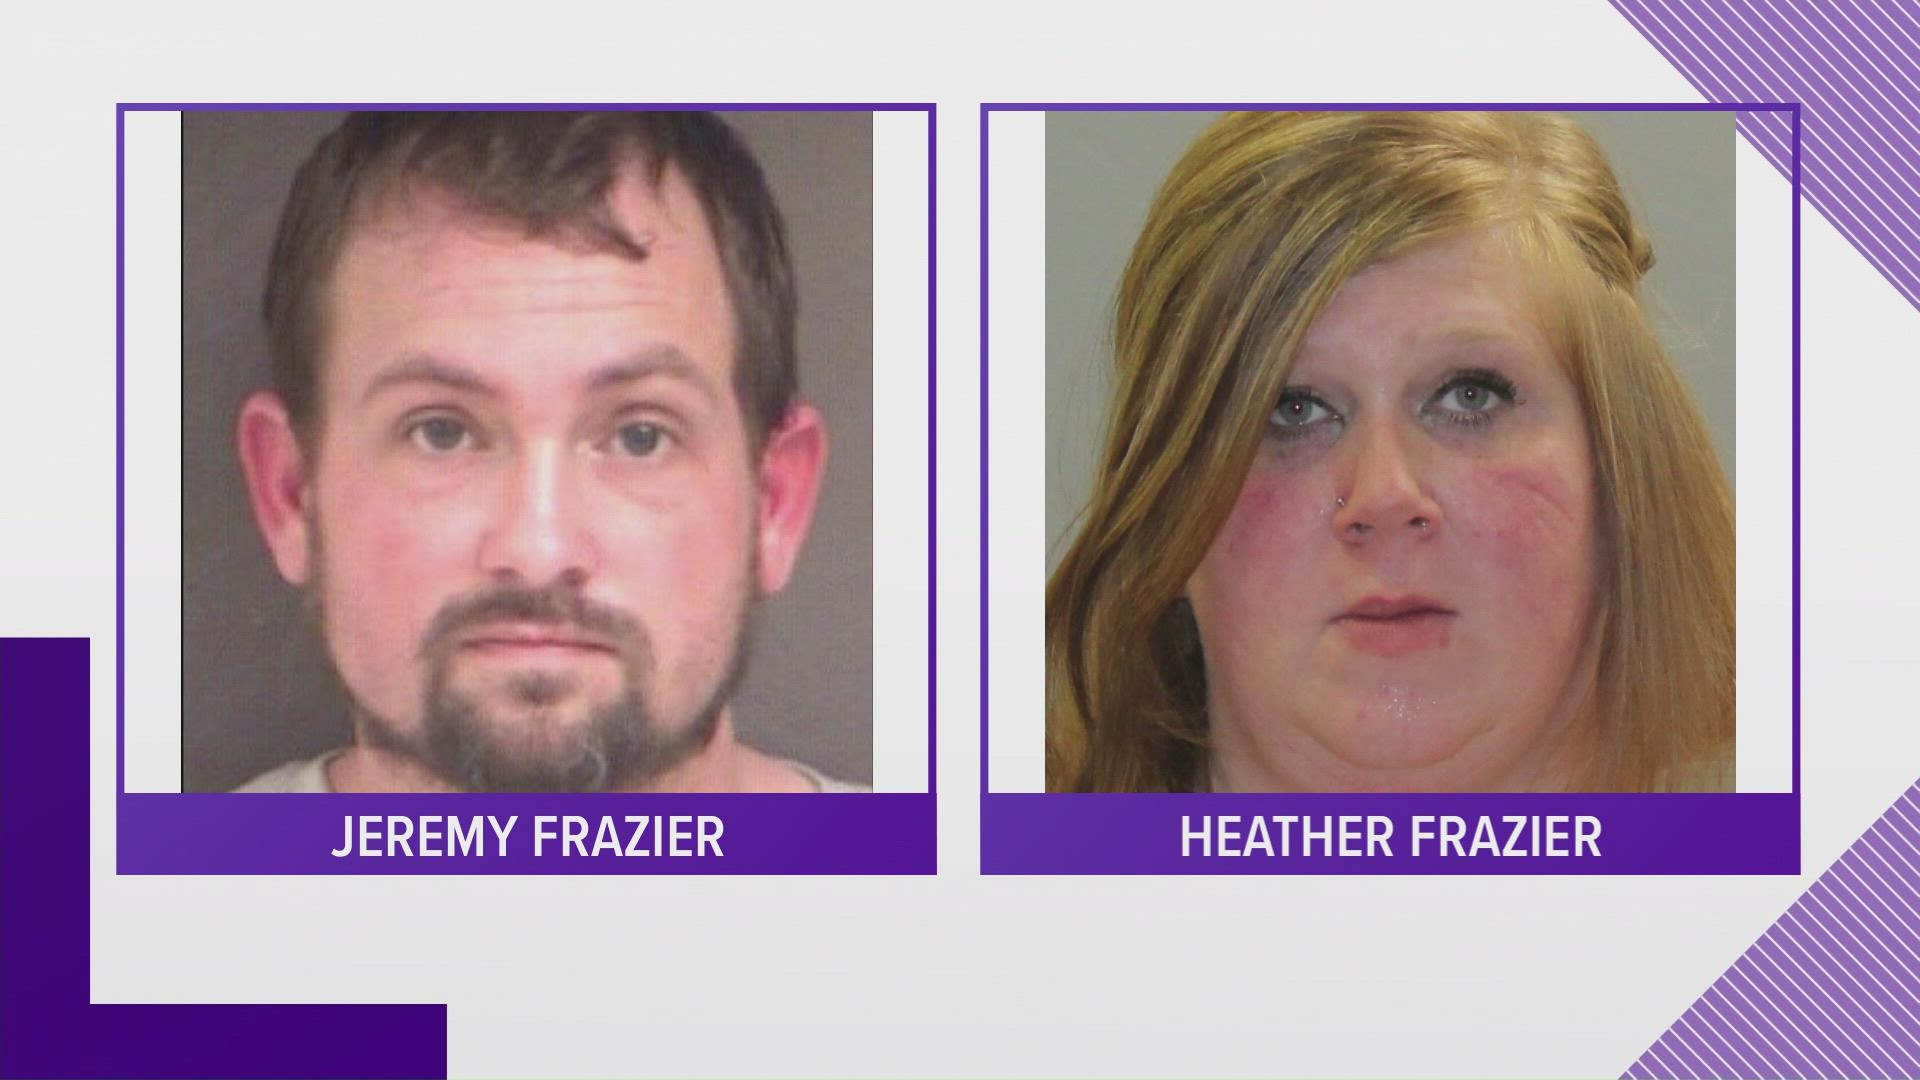 According to the Sheriff's office, both parents have been charged with Involuntary Manslaughter.